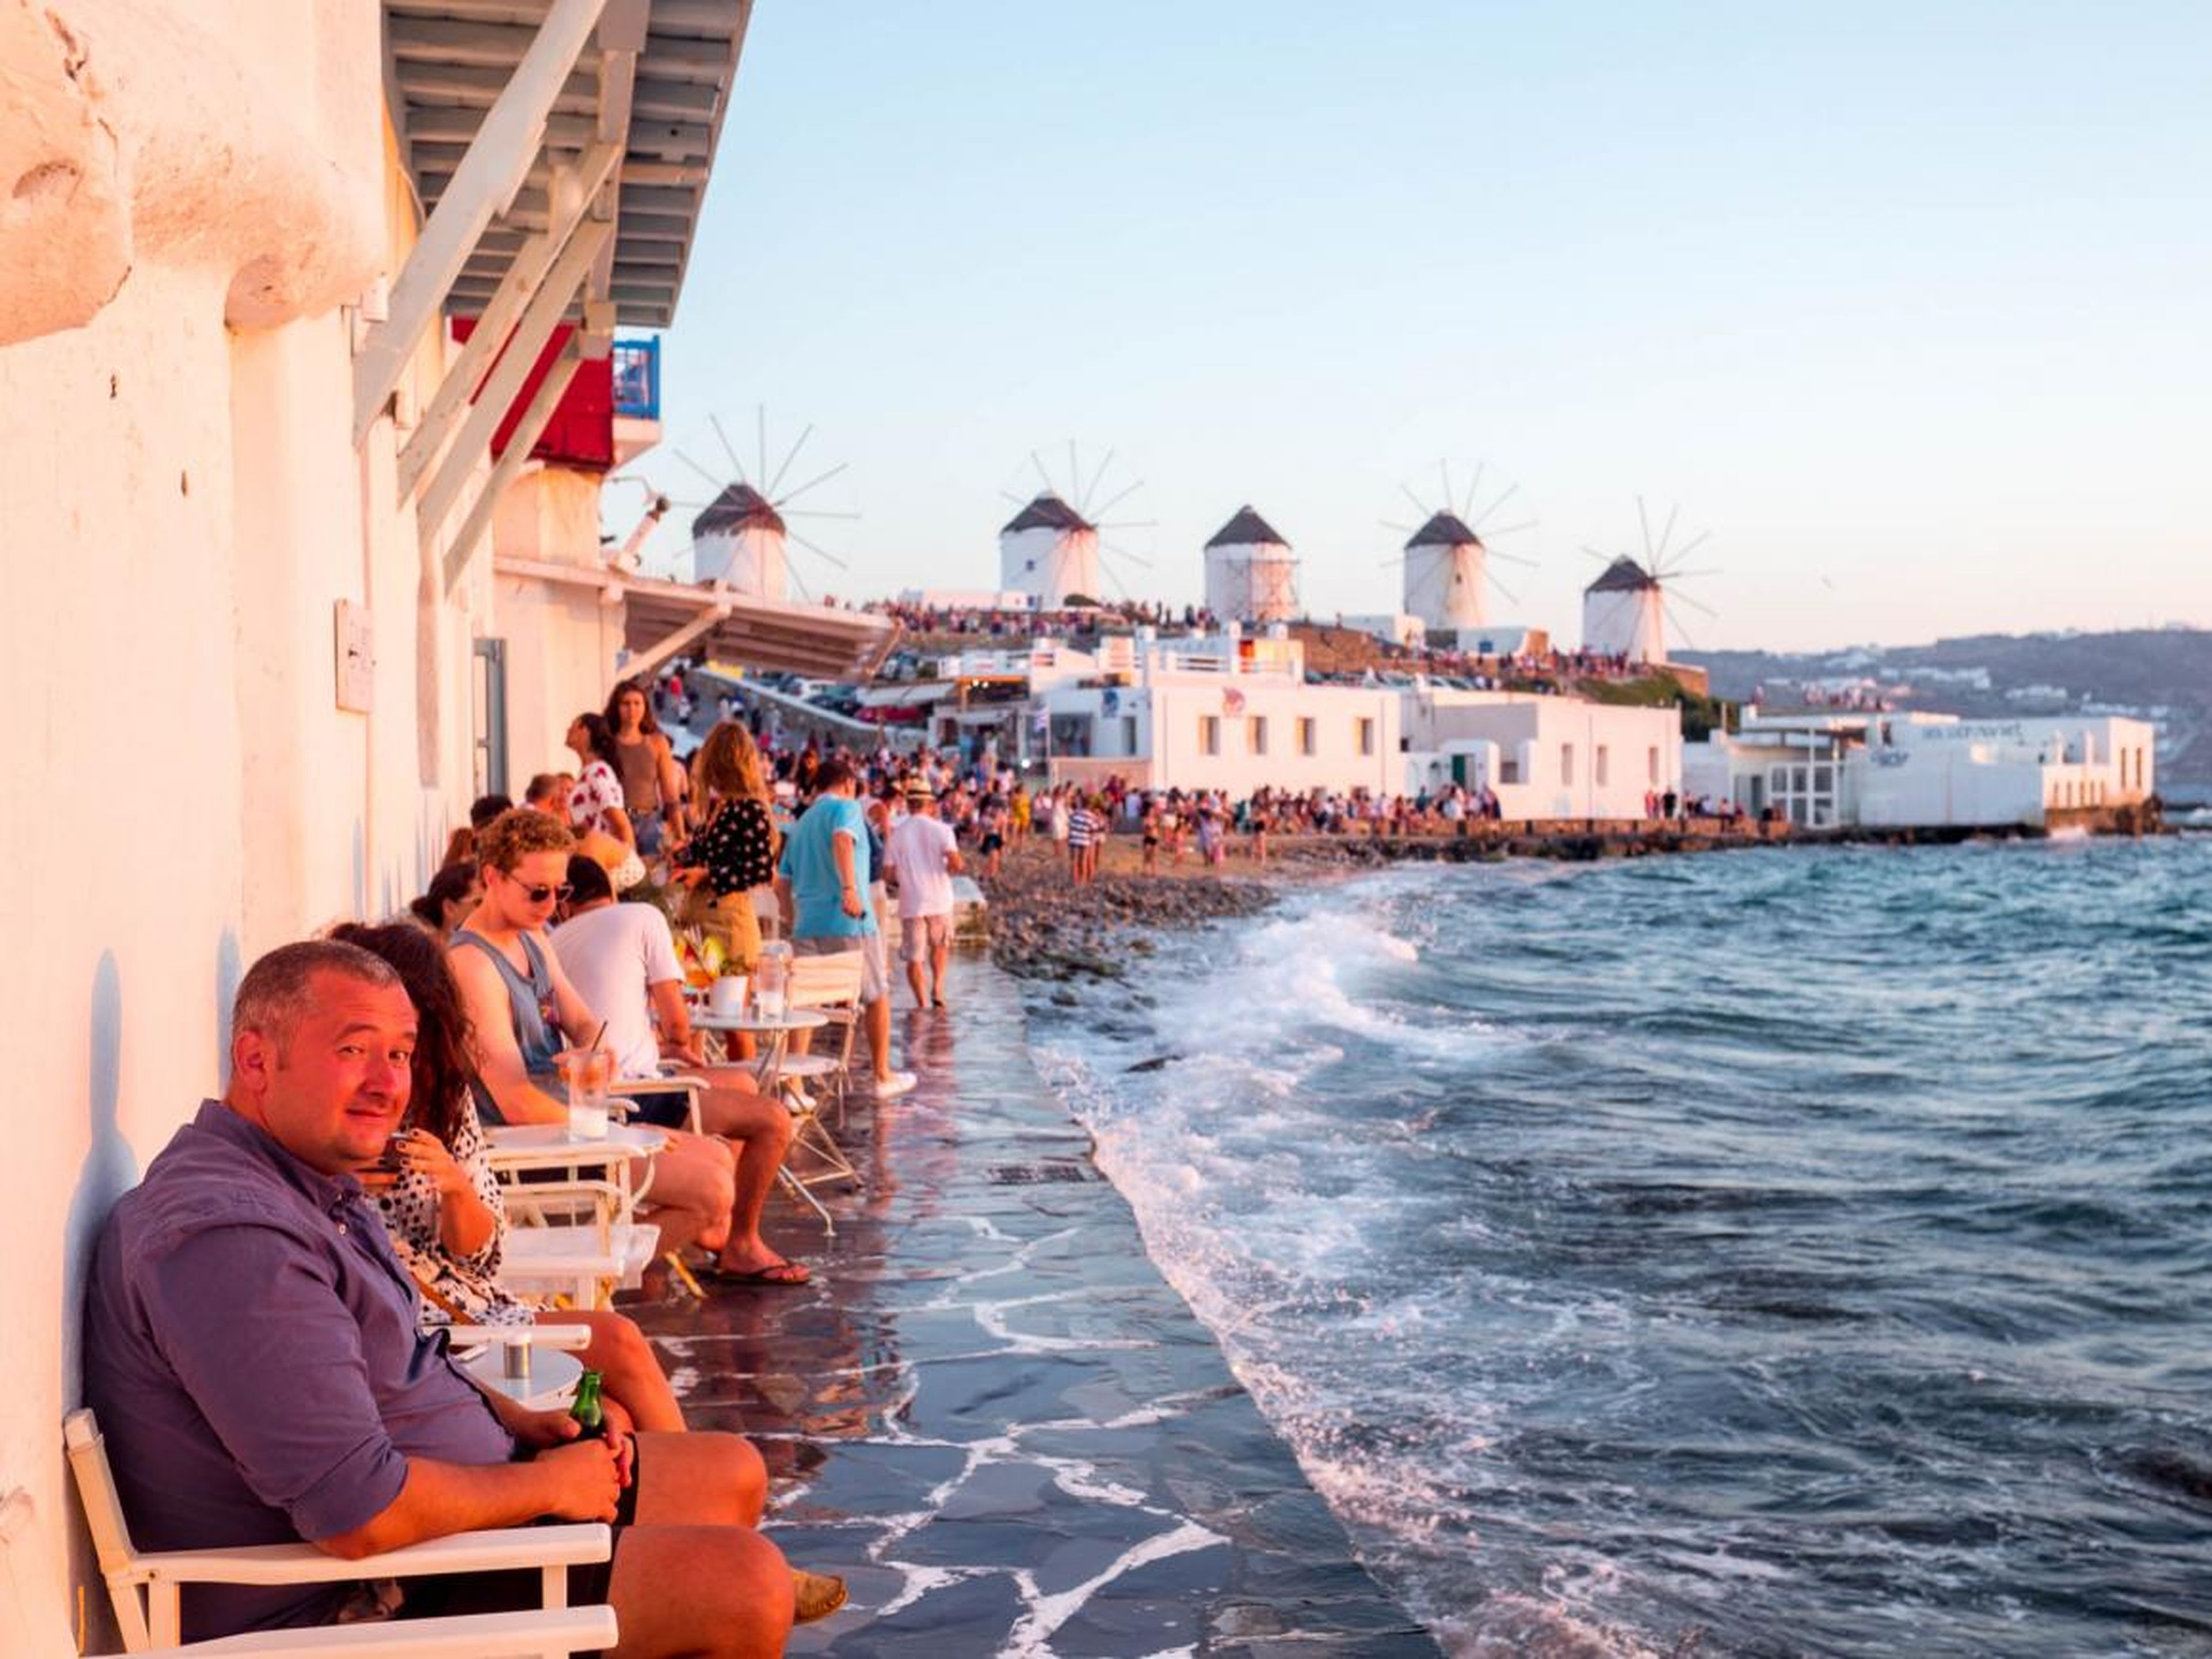 The most popular place to watch the sunset in Mykonos is Little Venice, a row of fishing houses that line the waterfront. The area has been converted into restaurants and bars, with chairs overlooking the surf.